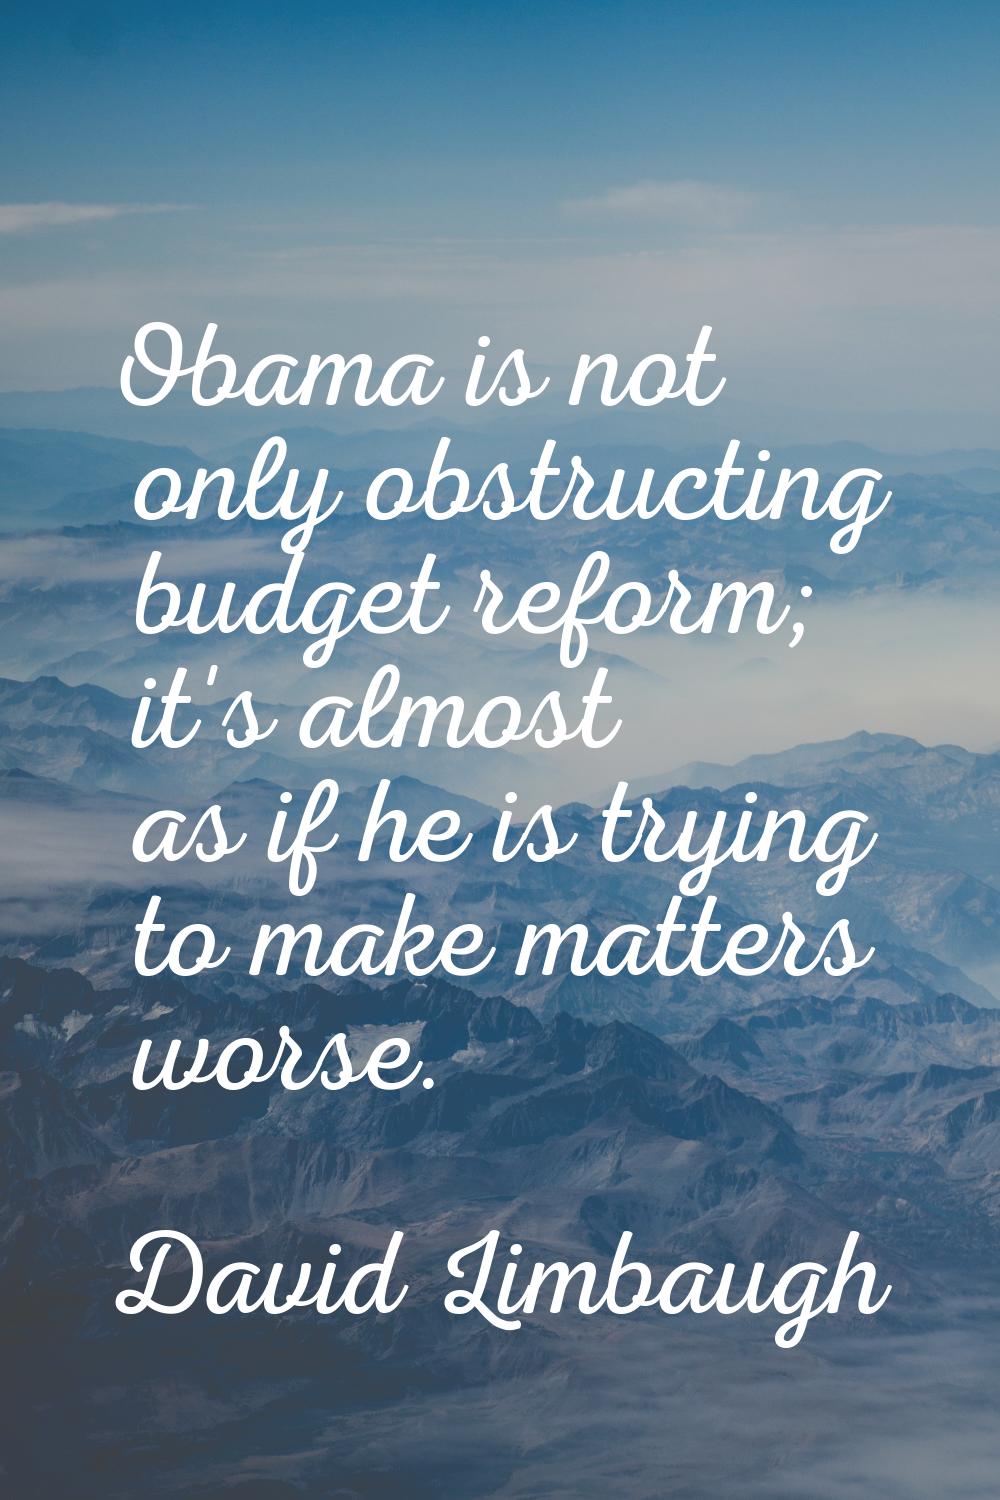 Obama is not only obstructing budget reform; it's almost as if he is trying to make matters worse.